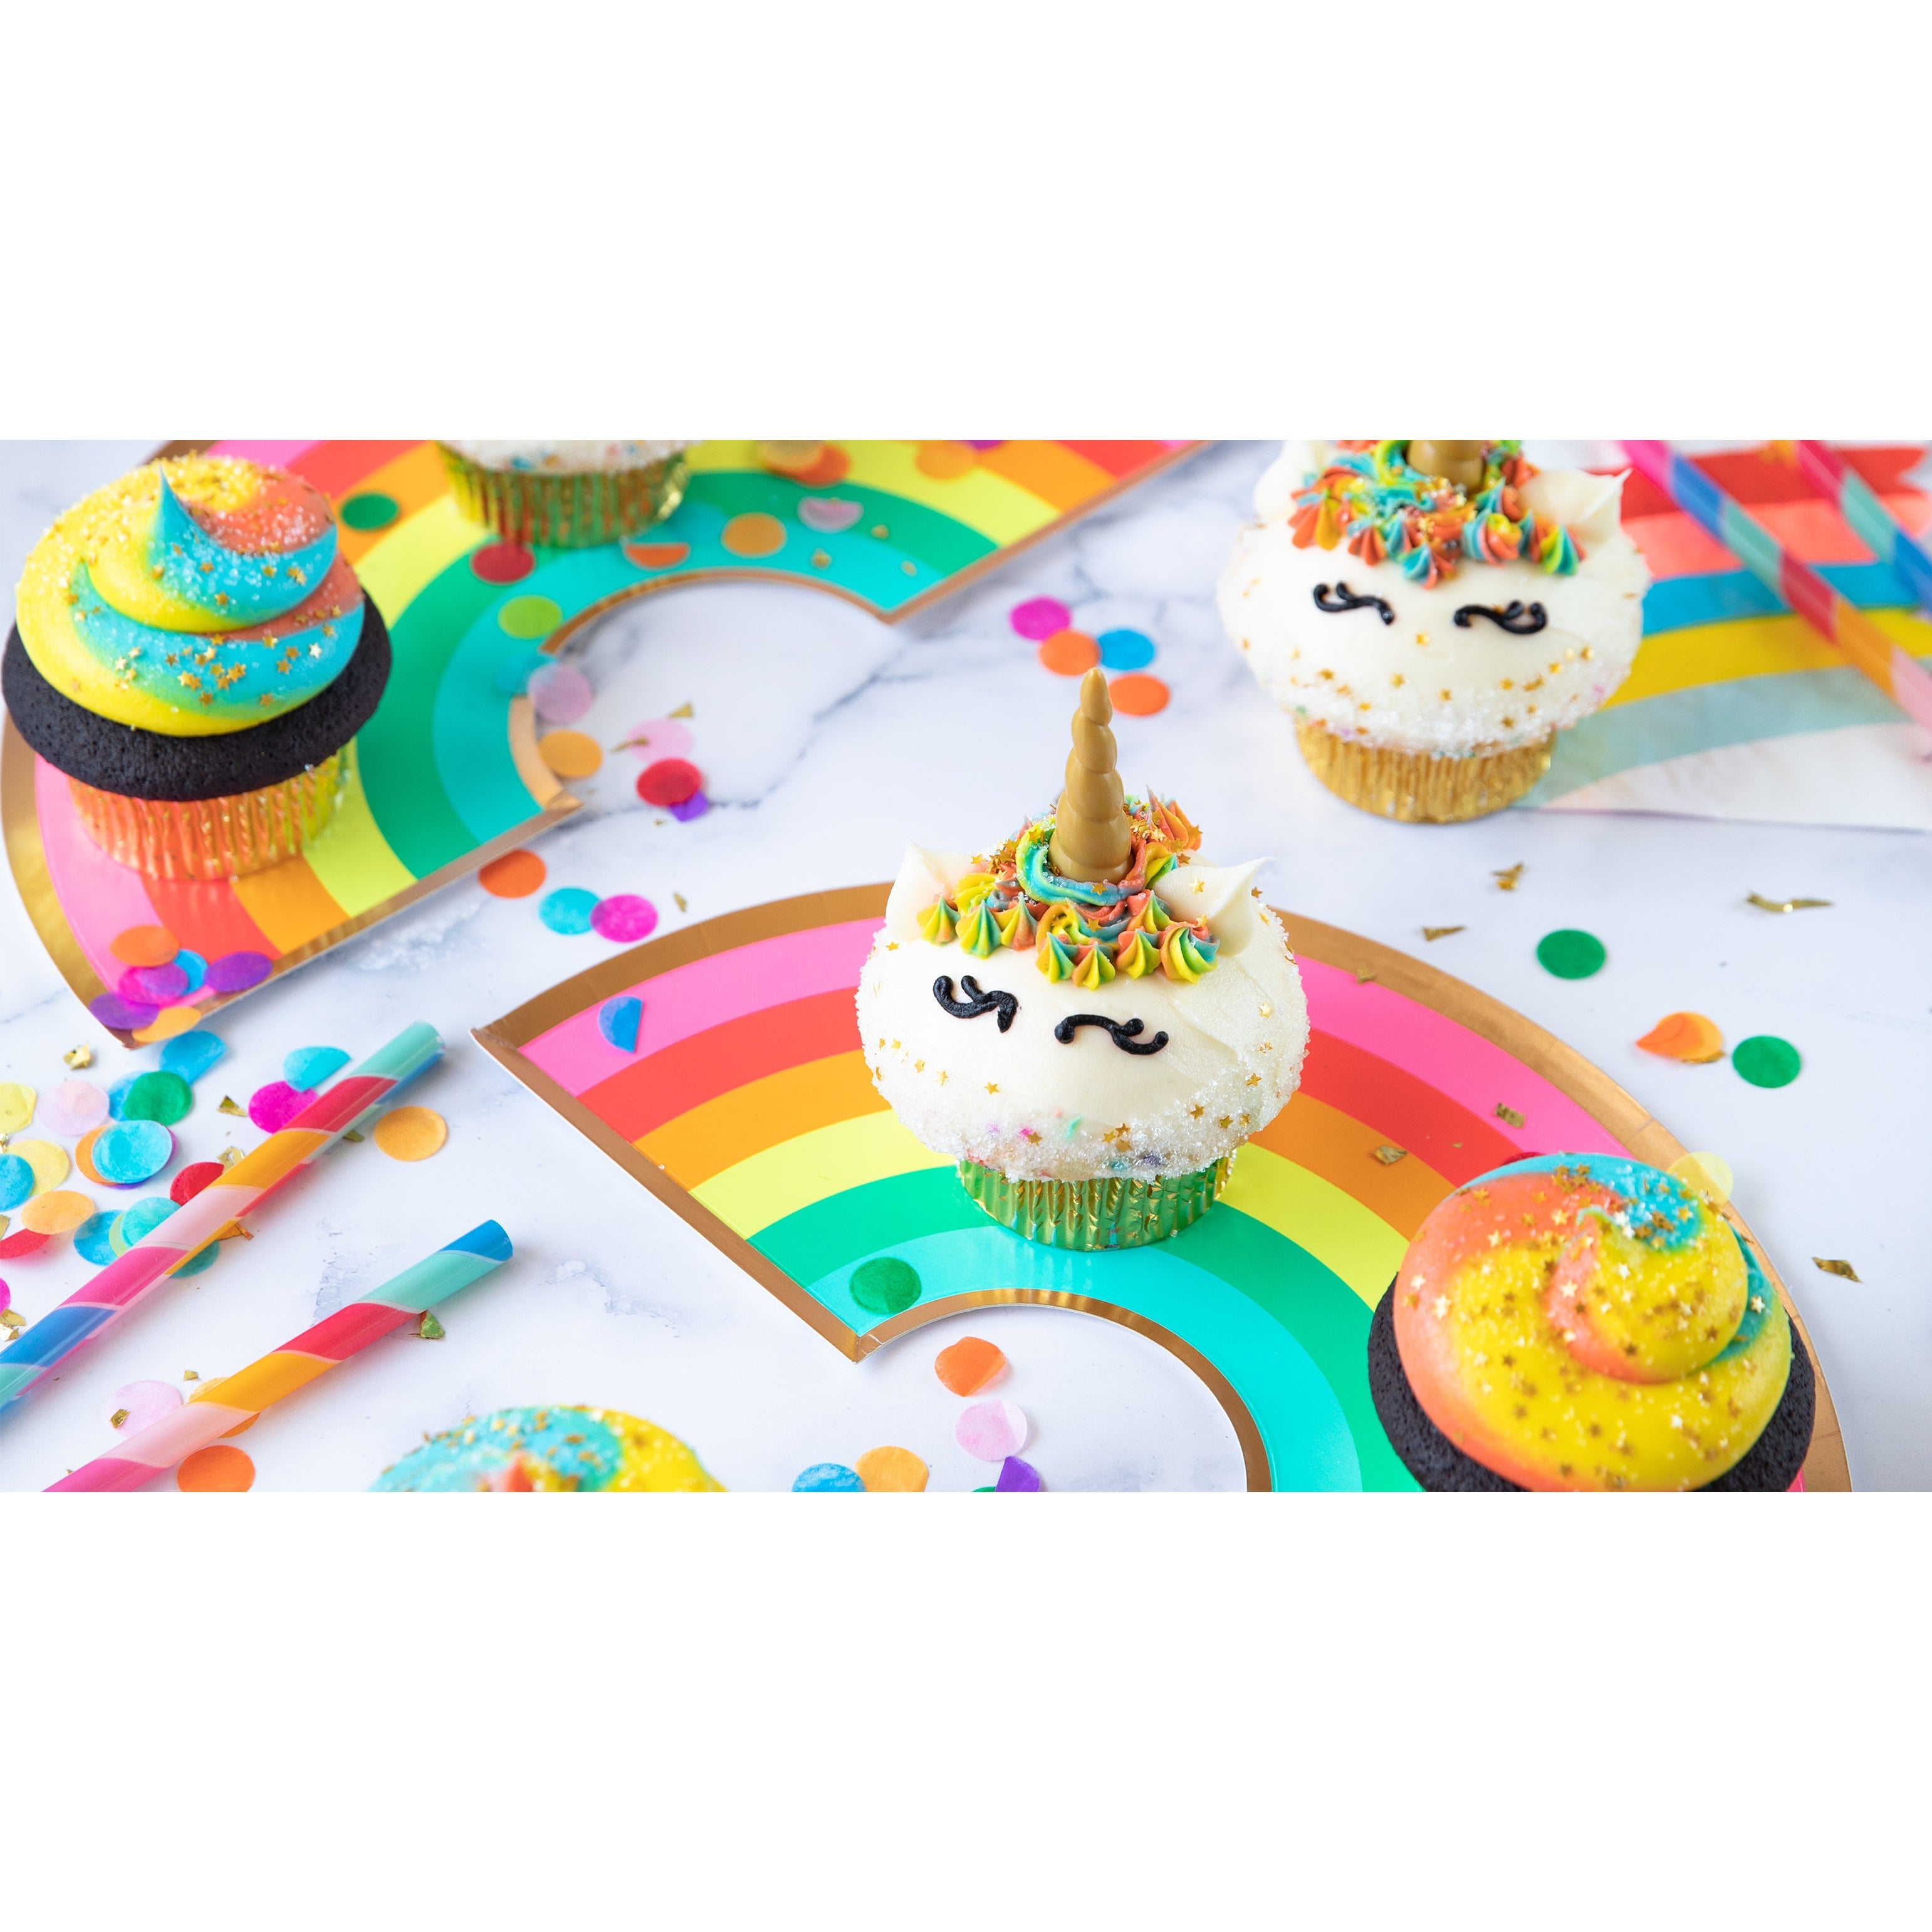 The Top 25 Most Magical Unicorn Birthday Party Ideas